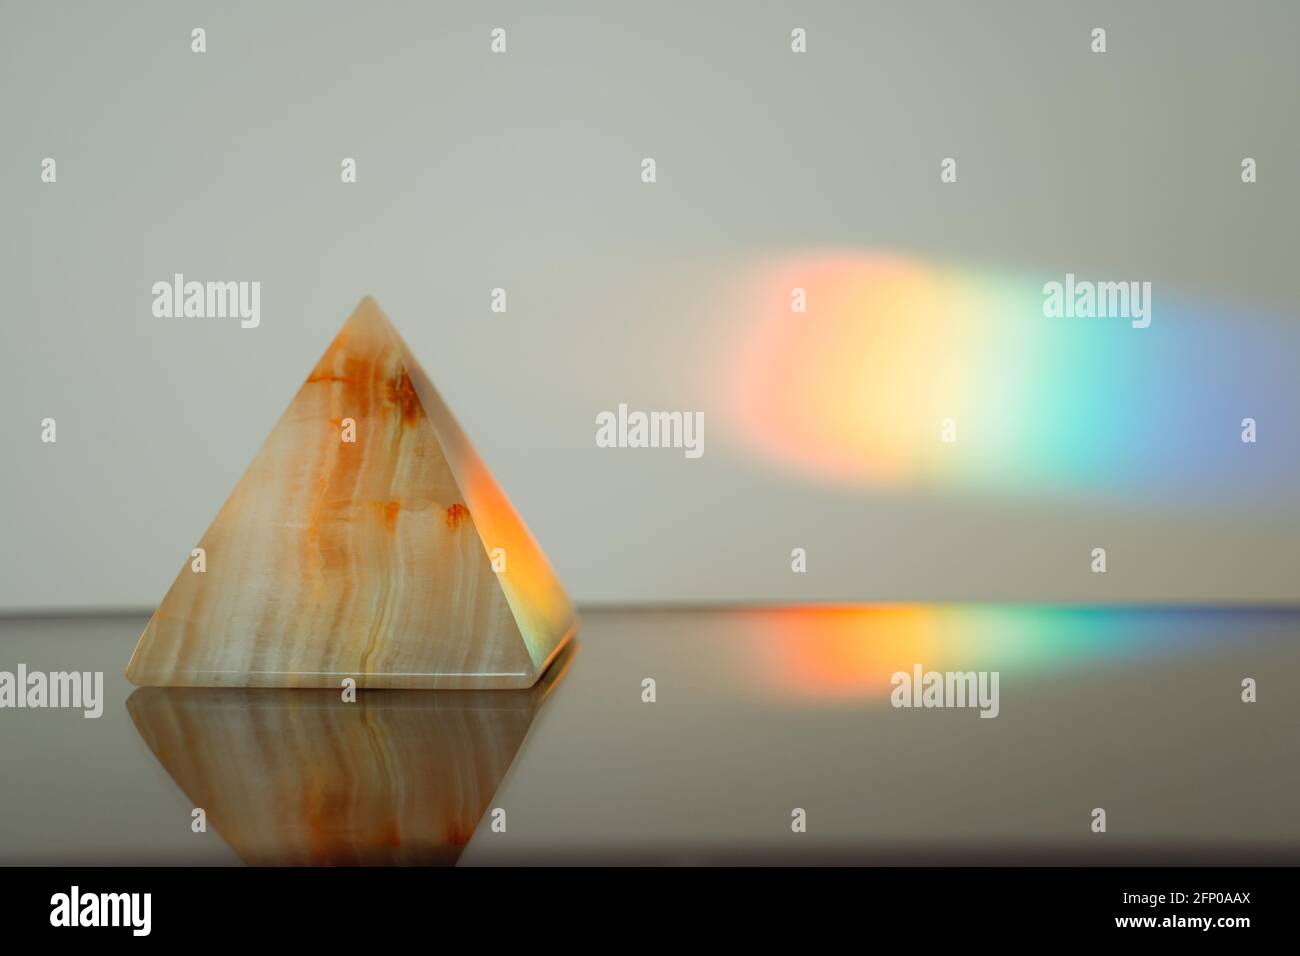 Agate pyramid with a rainbow streak background on a reflective surface Stock Photo